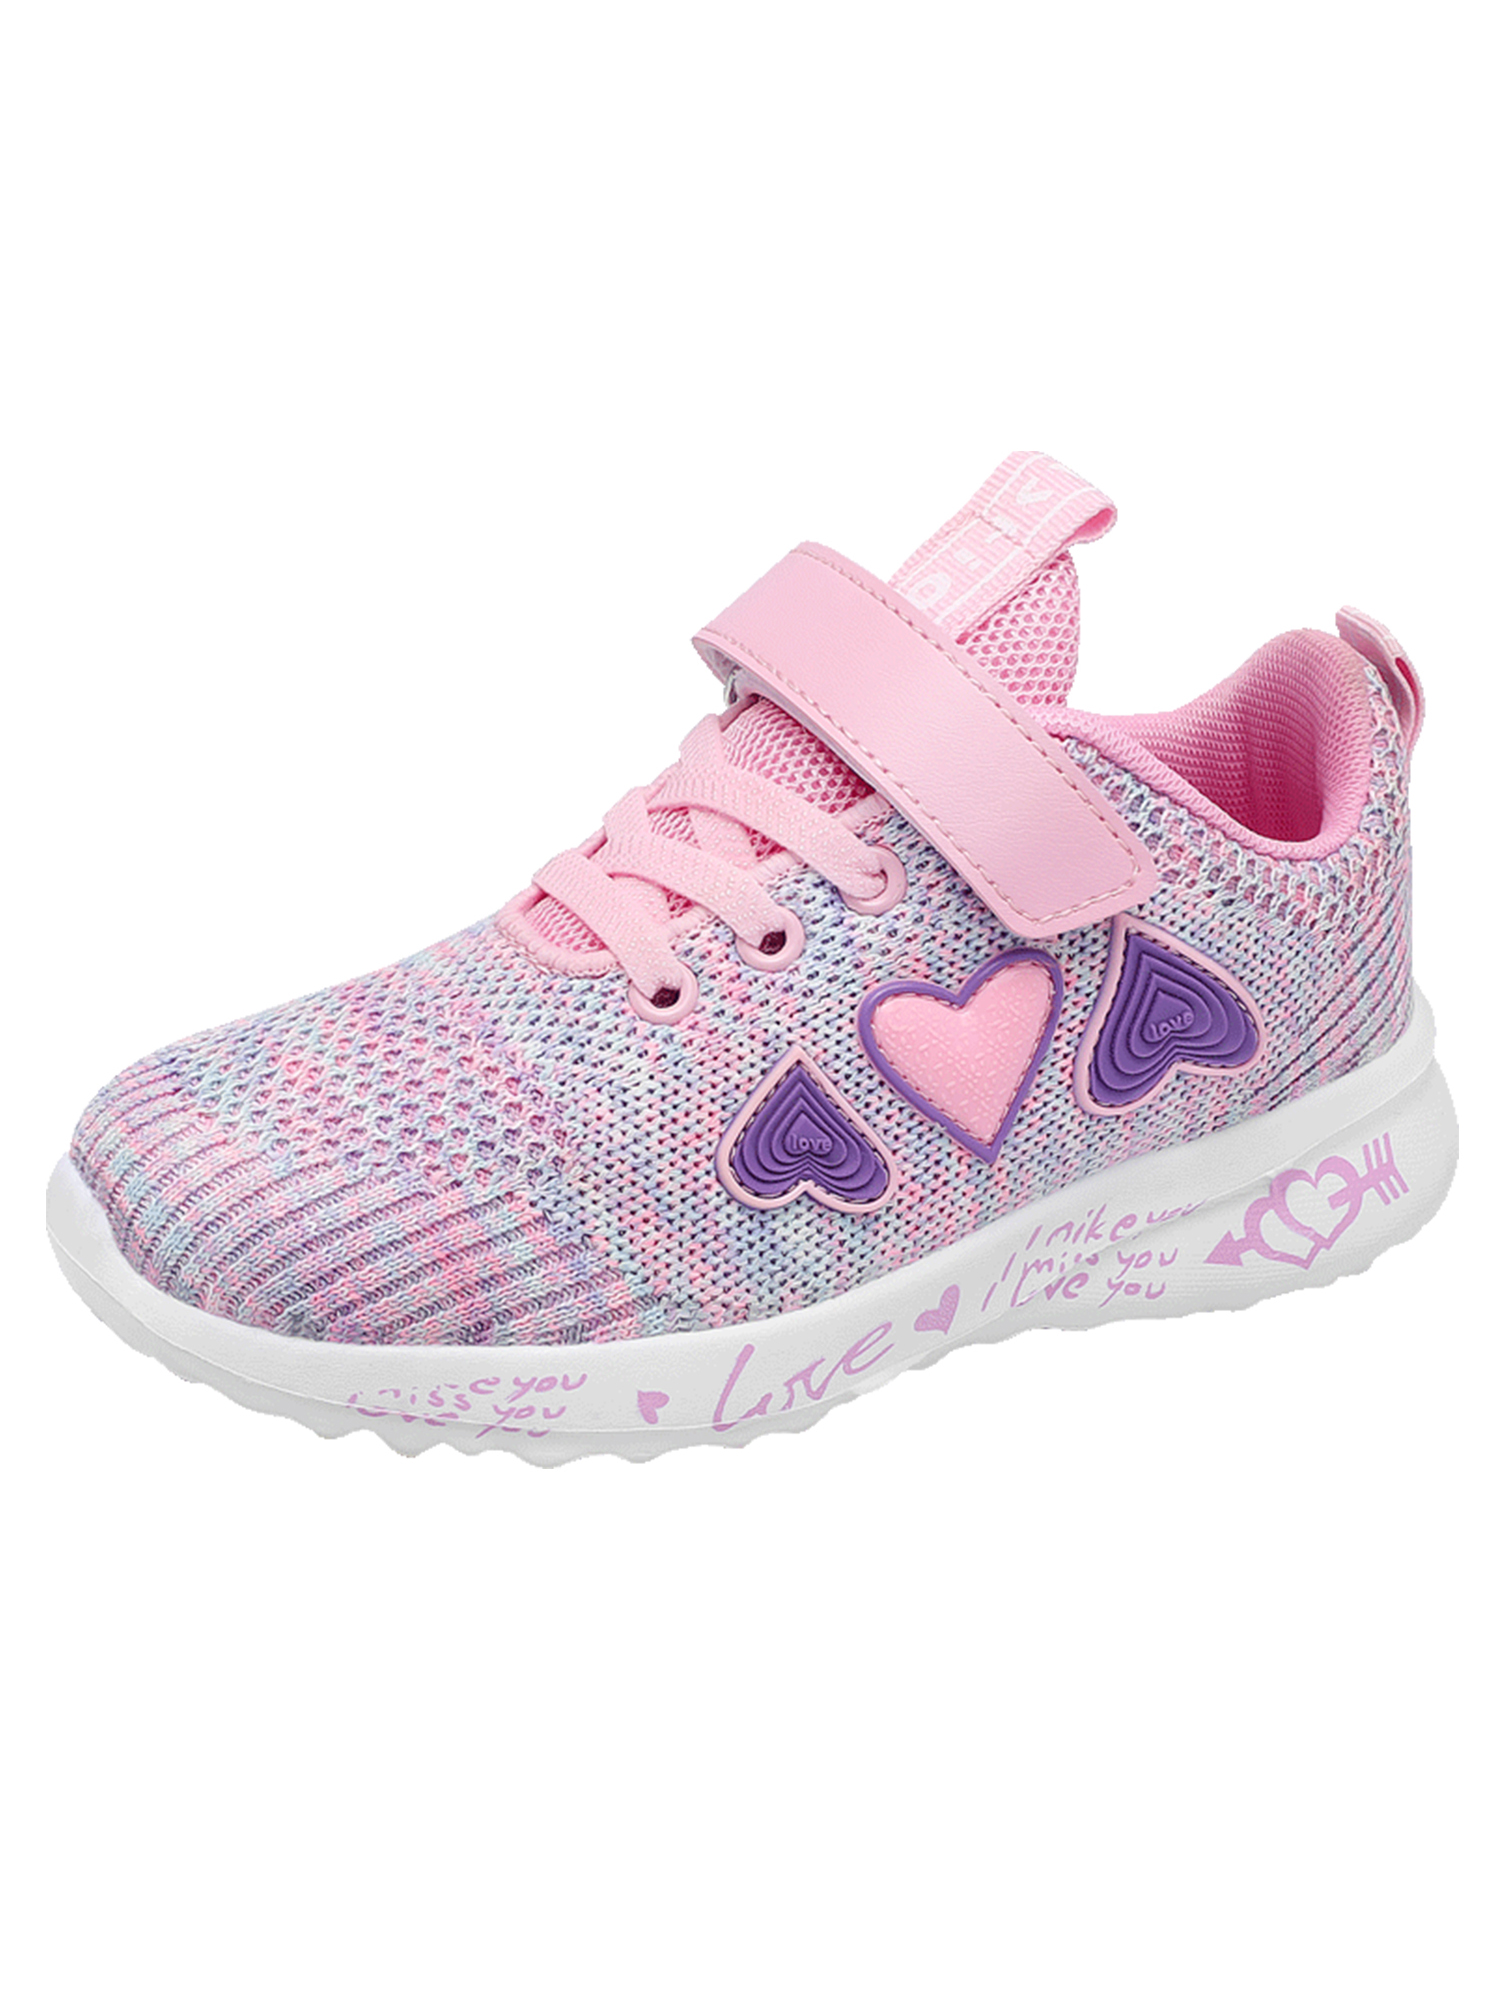 Tanleewa Lovely Girls Sports Shoes Kids Breathable Sneakers Lightweight Casual Shoe Size 1 - image 4 of 7